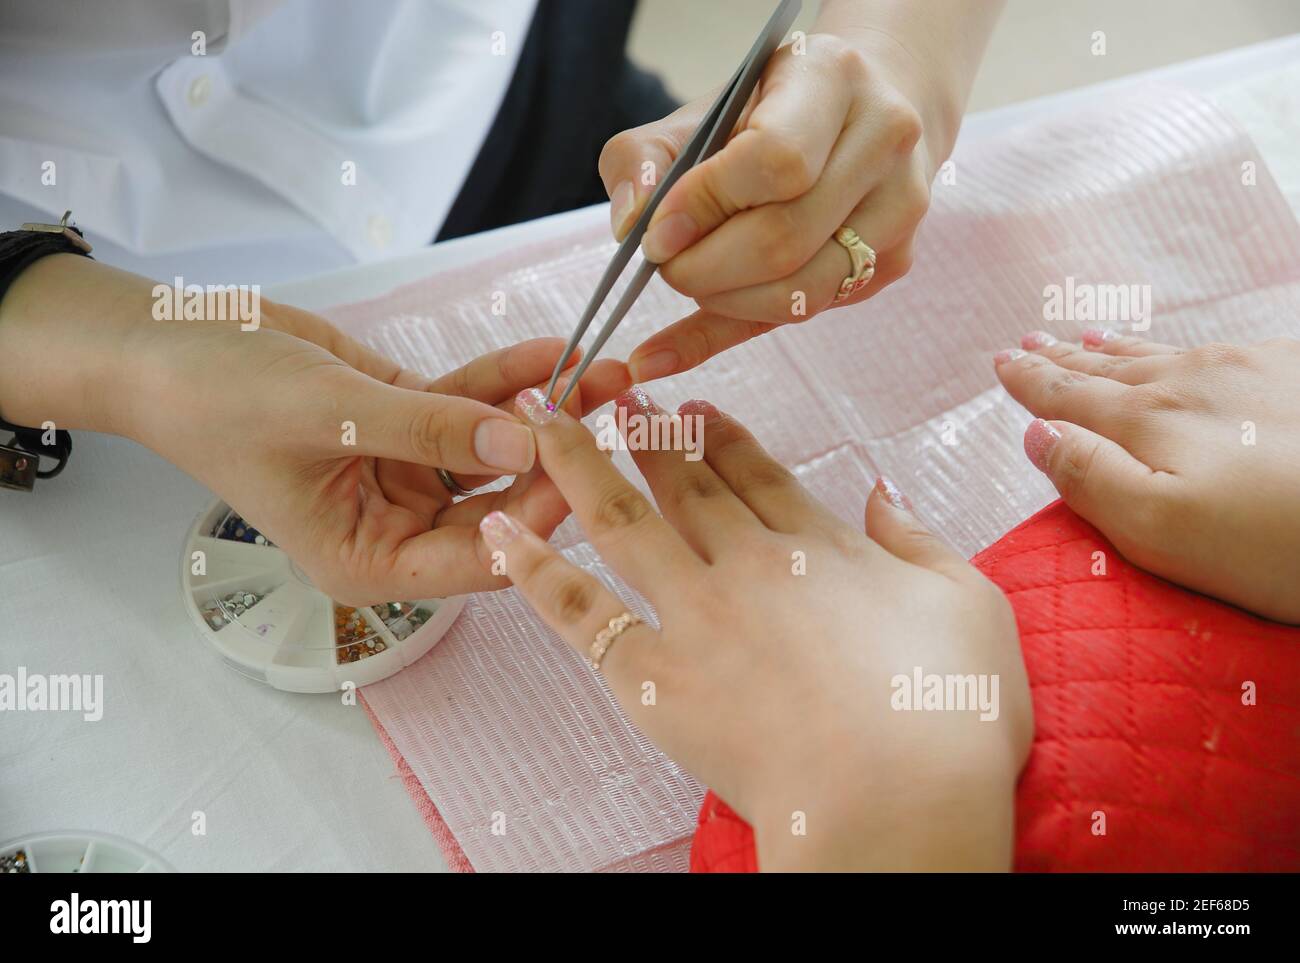 Manicure. Beautiful well-groomed hands and fingernails for woman. Taking care of your appearance and healthy lifestyle. Stock Photo